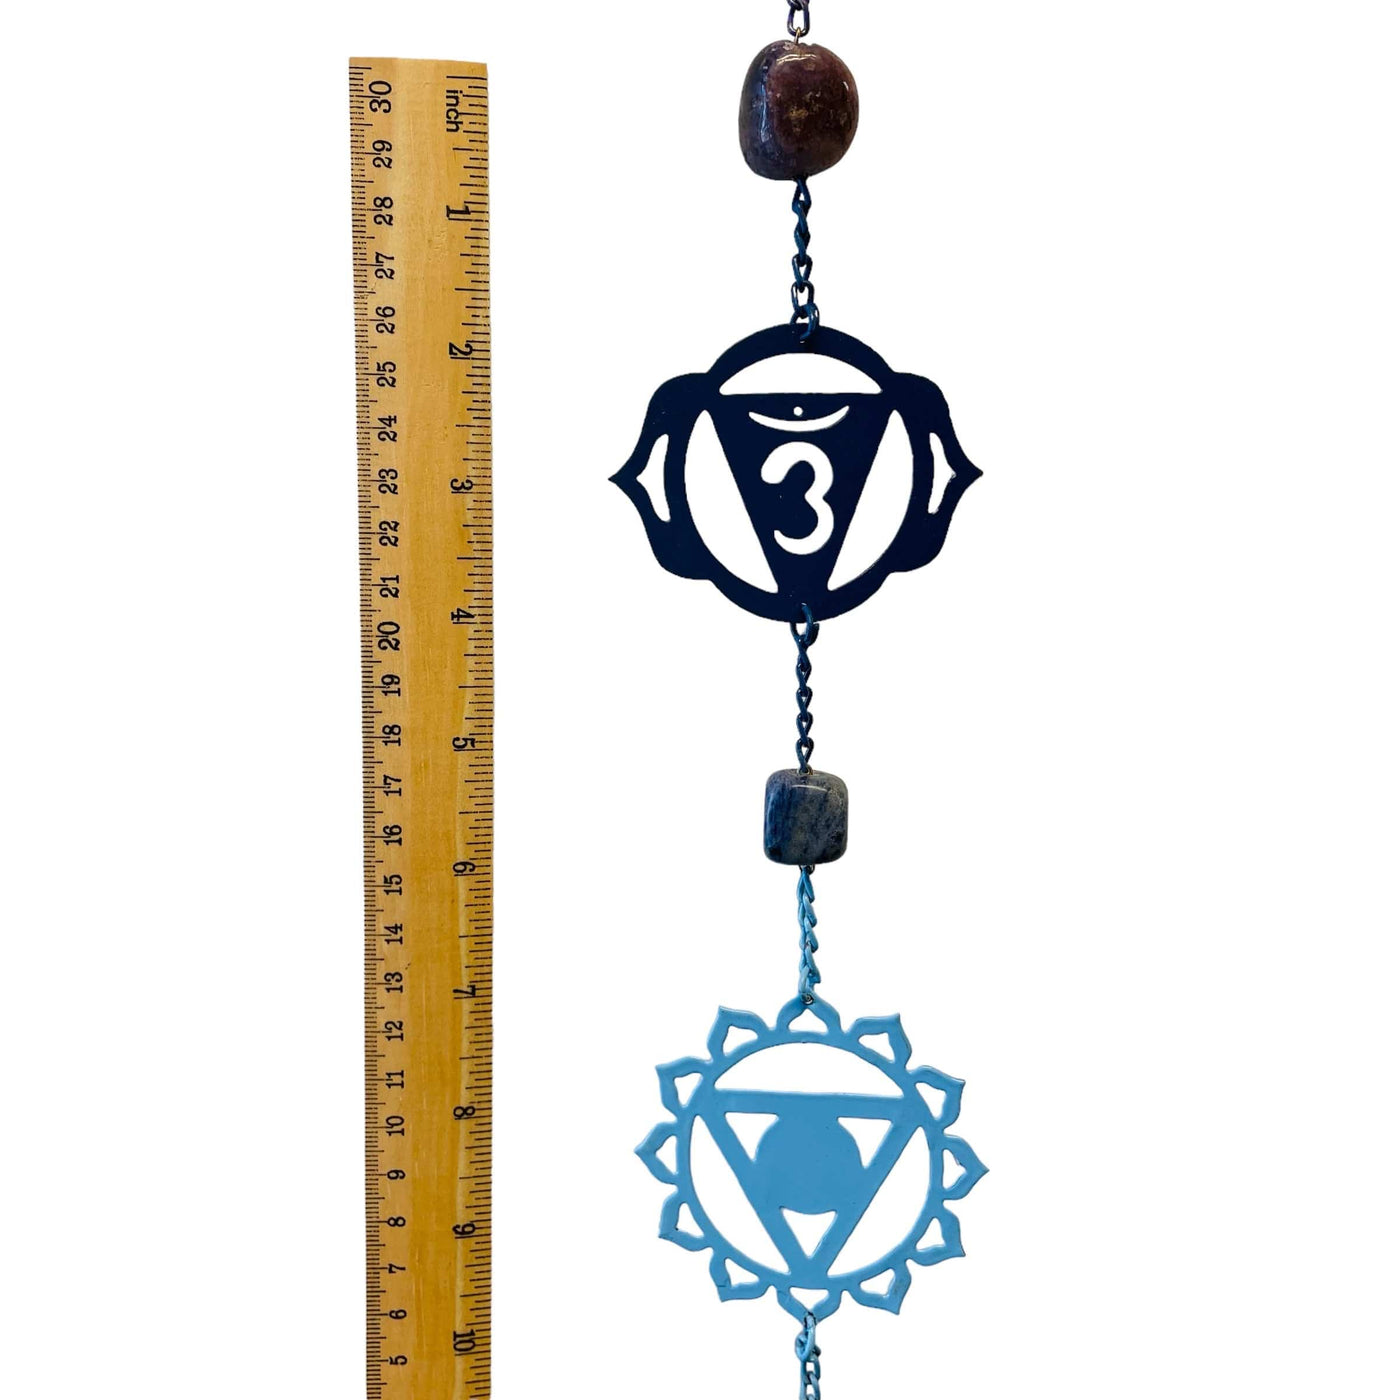 chakra symbols next to a ruler for size reference 